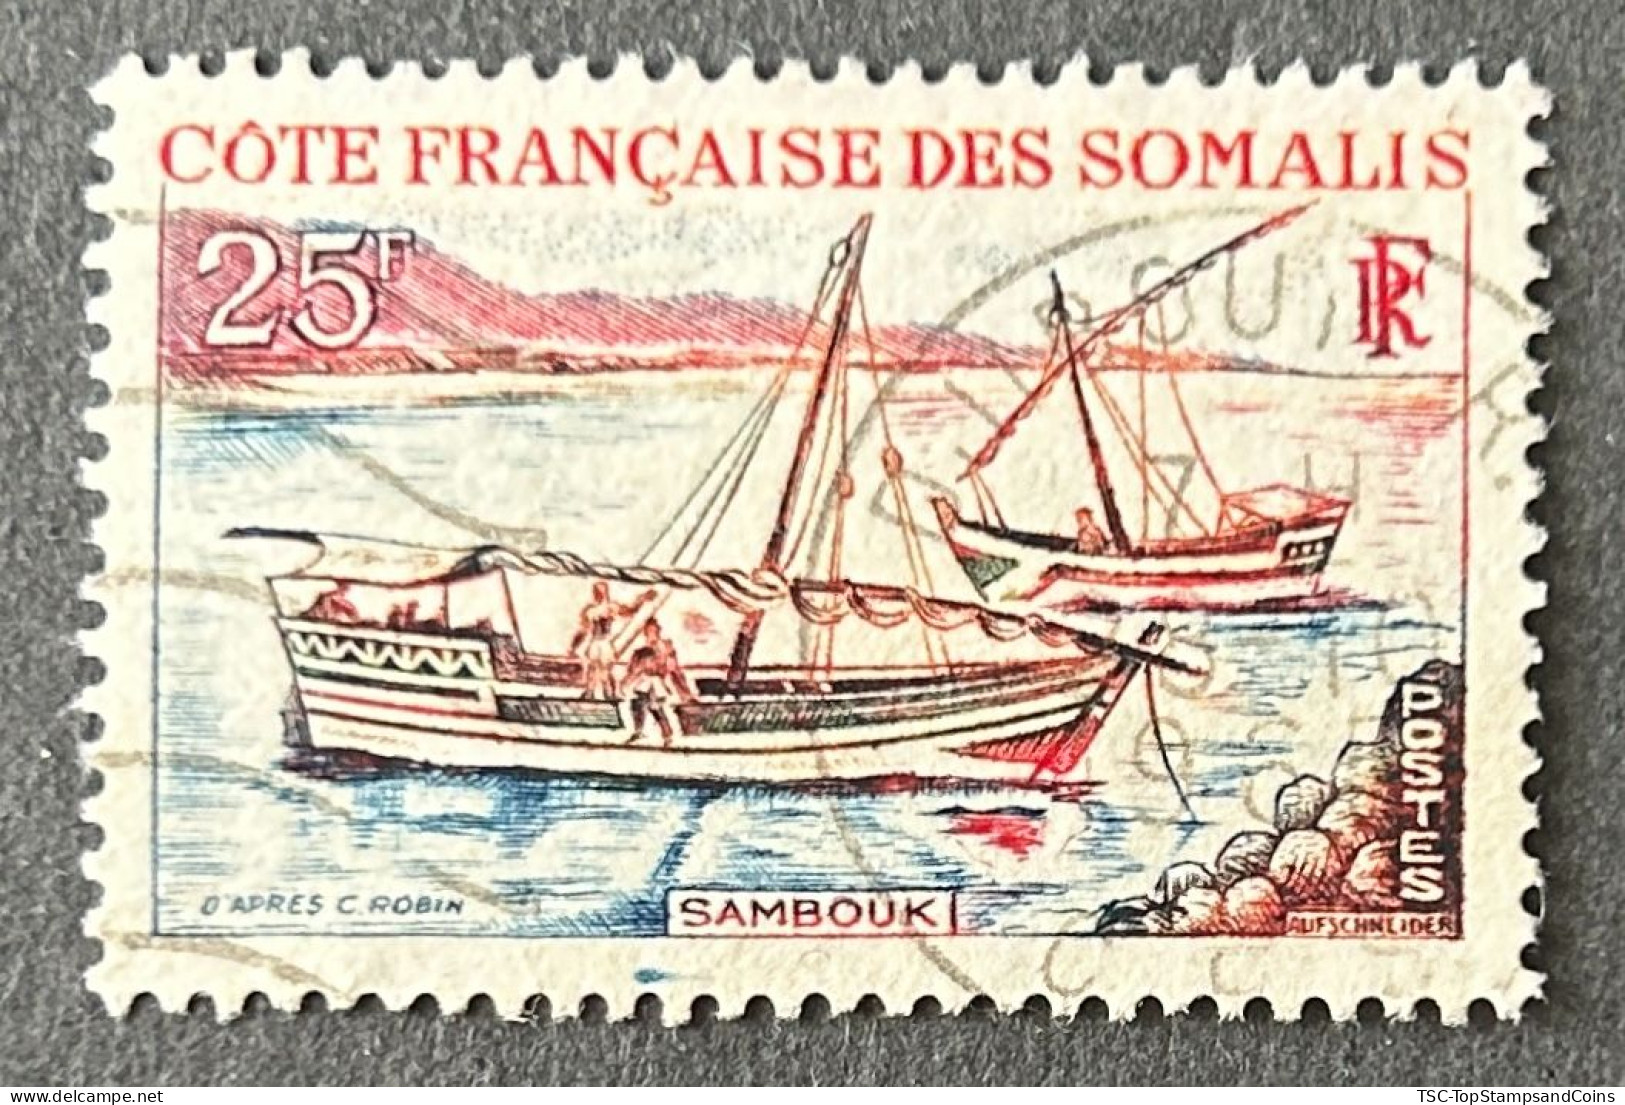 FRSO0321U - Local Dhows - Sambouk - 25 F Used Stamp - French Somali Coast - 1964 - Oblitérés